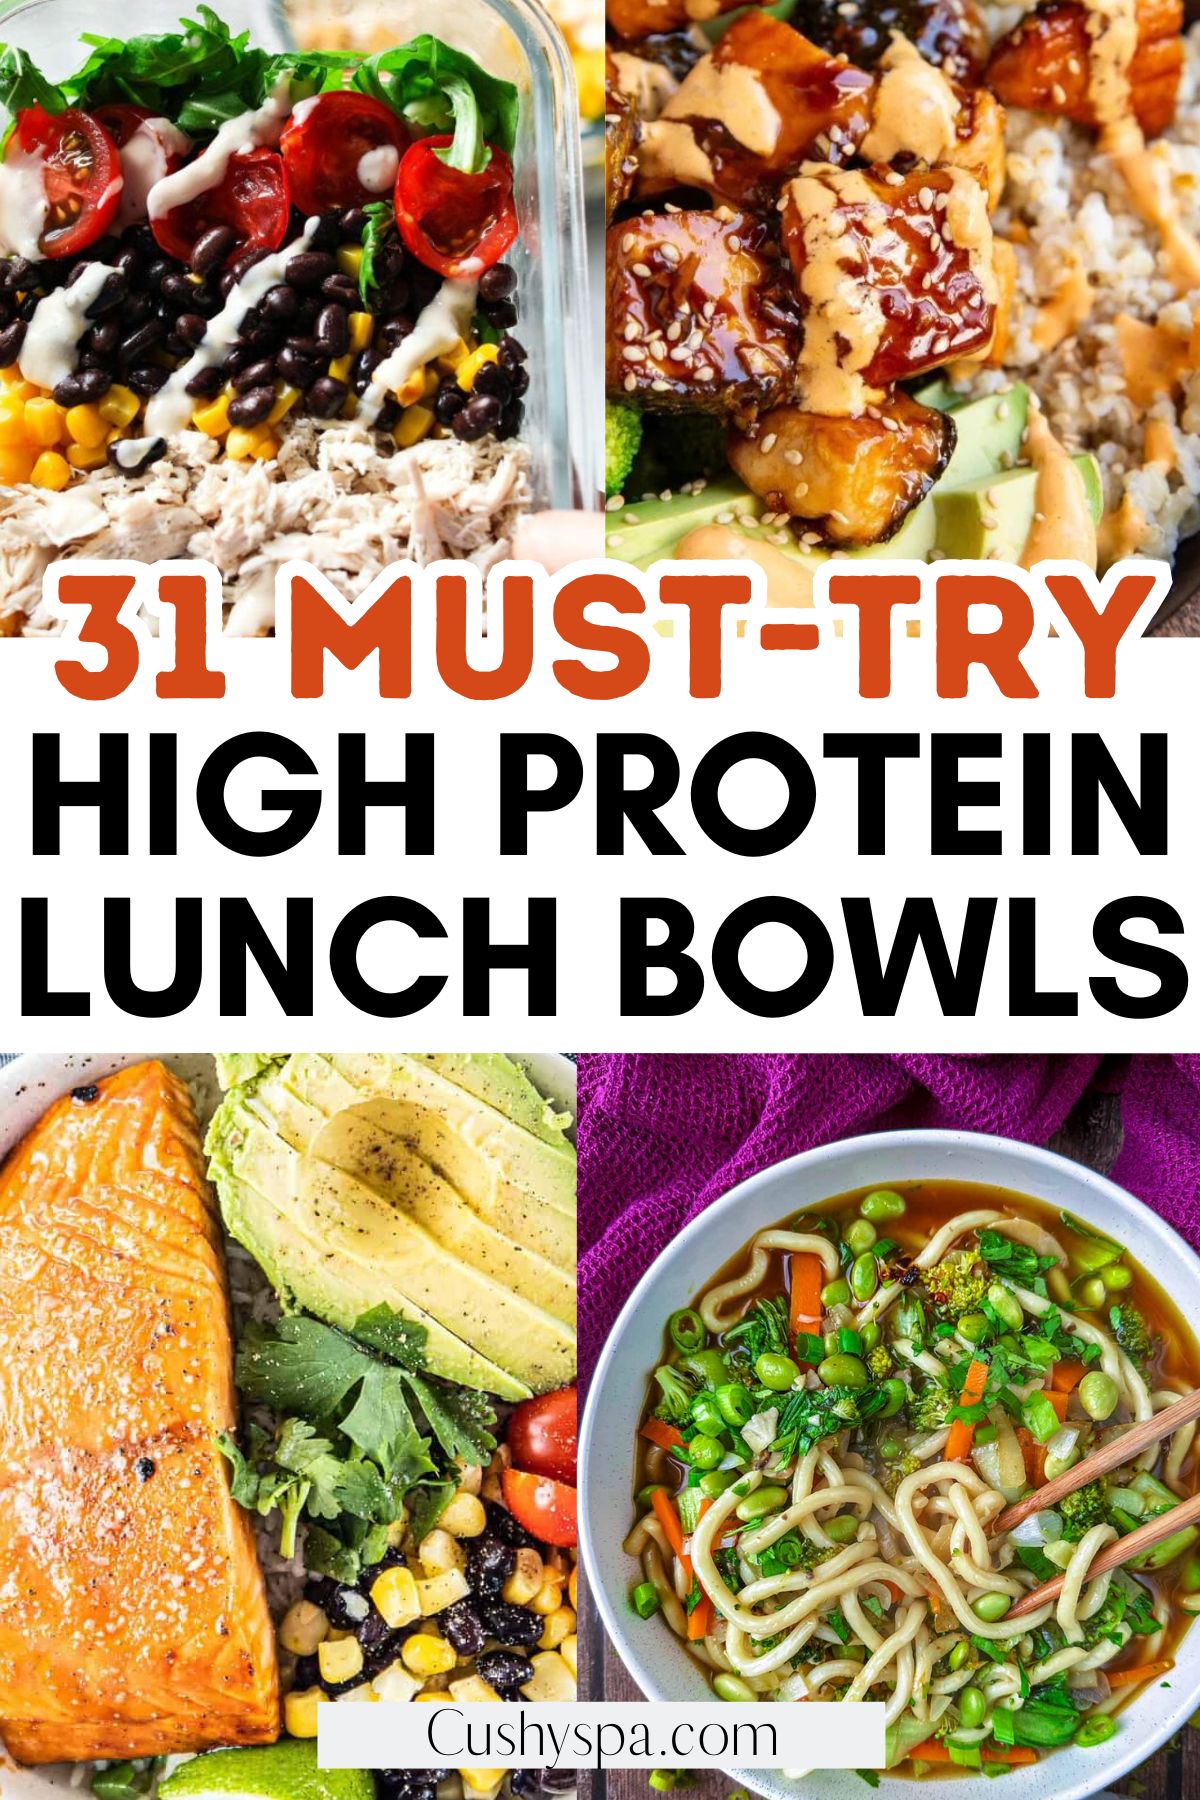 High Protein Lunch Bowls